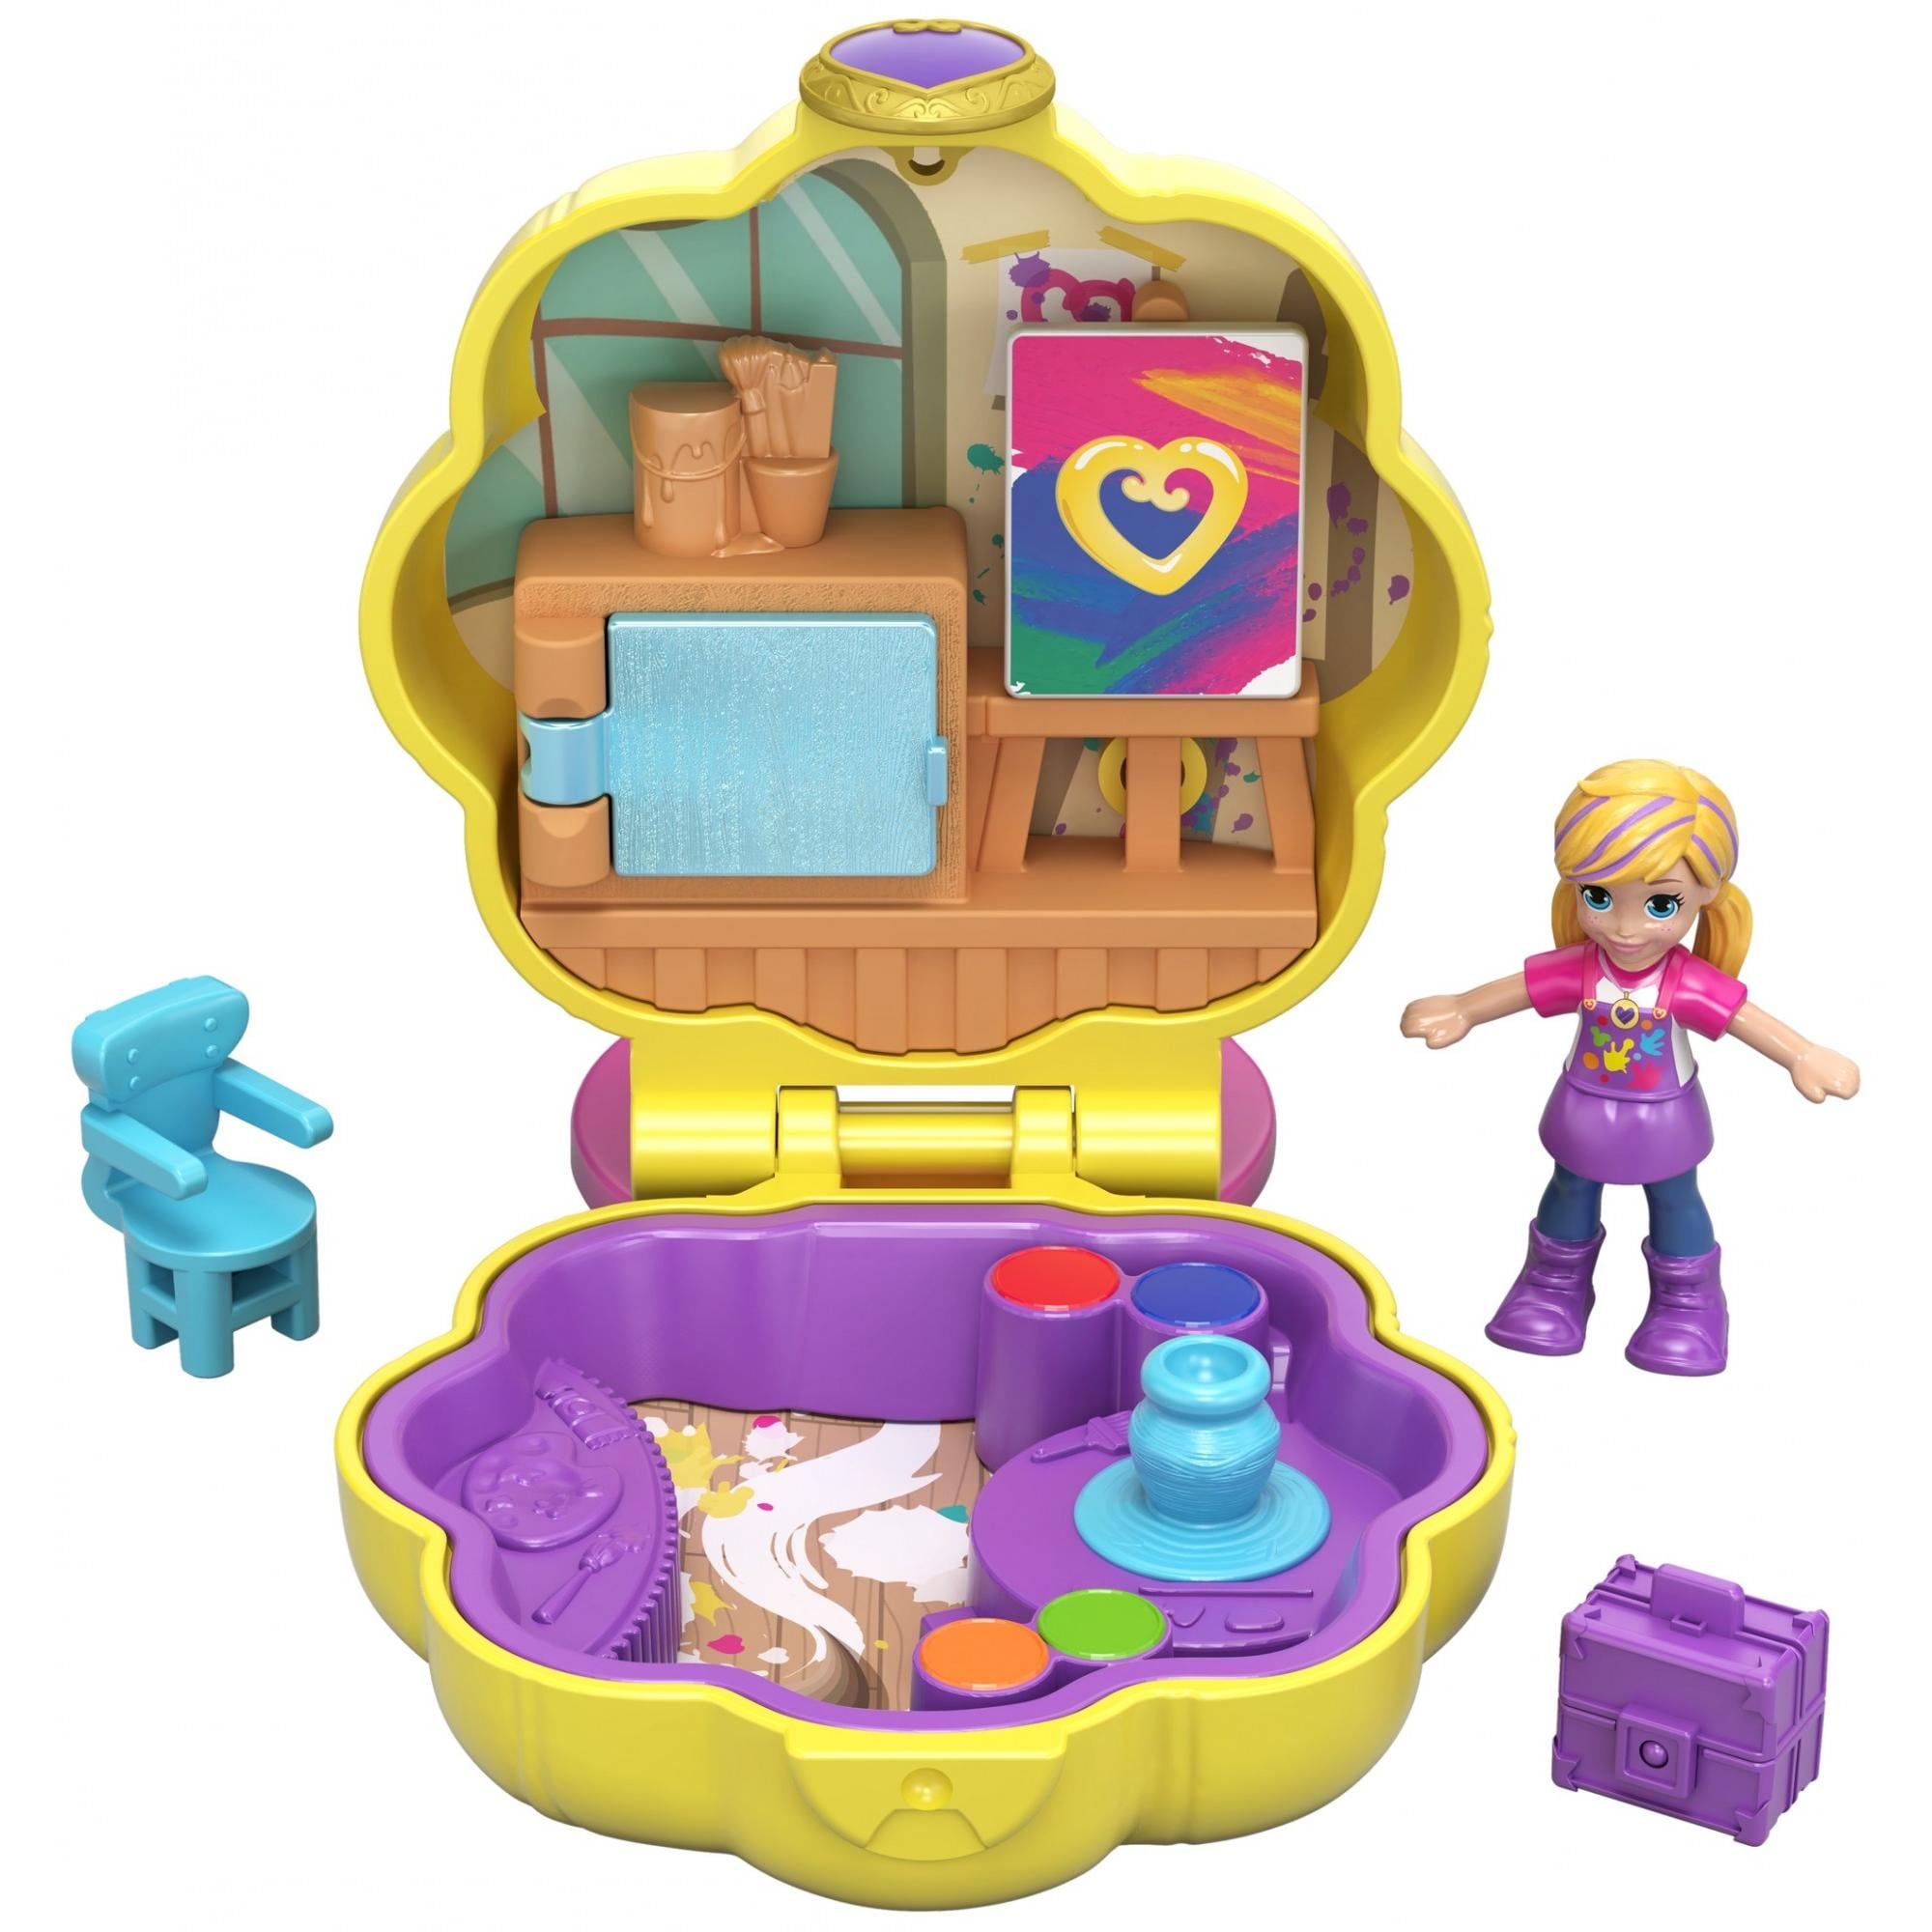 Gift Polly Pocket Tiny Places Fiercely Fab Studio Compact Mattel Toy Play Set 